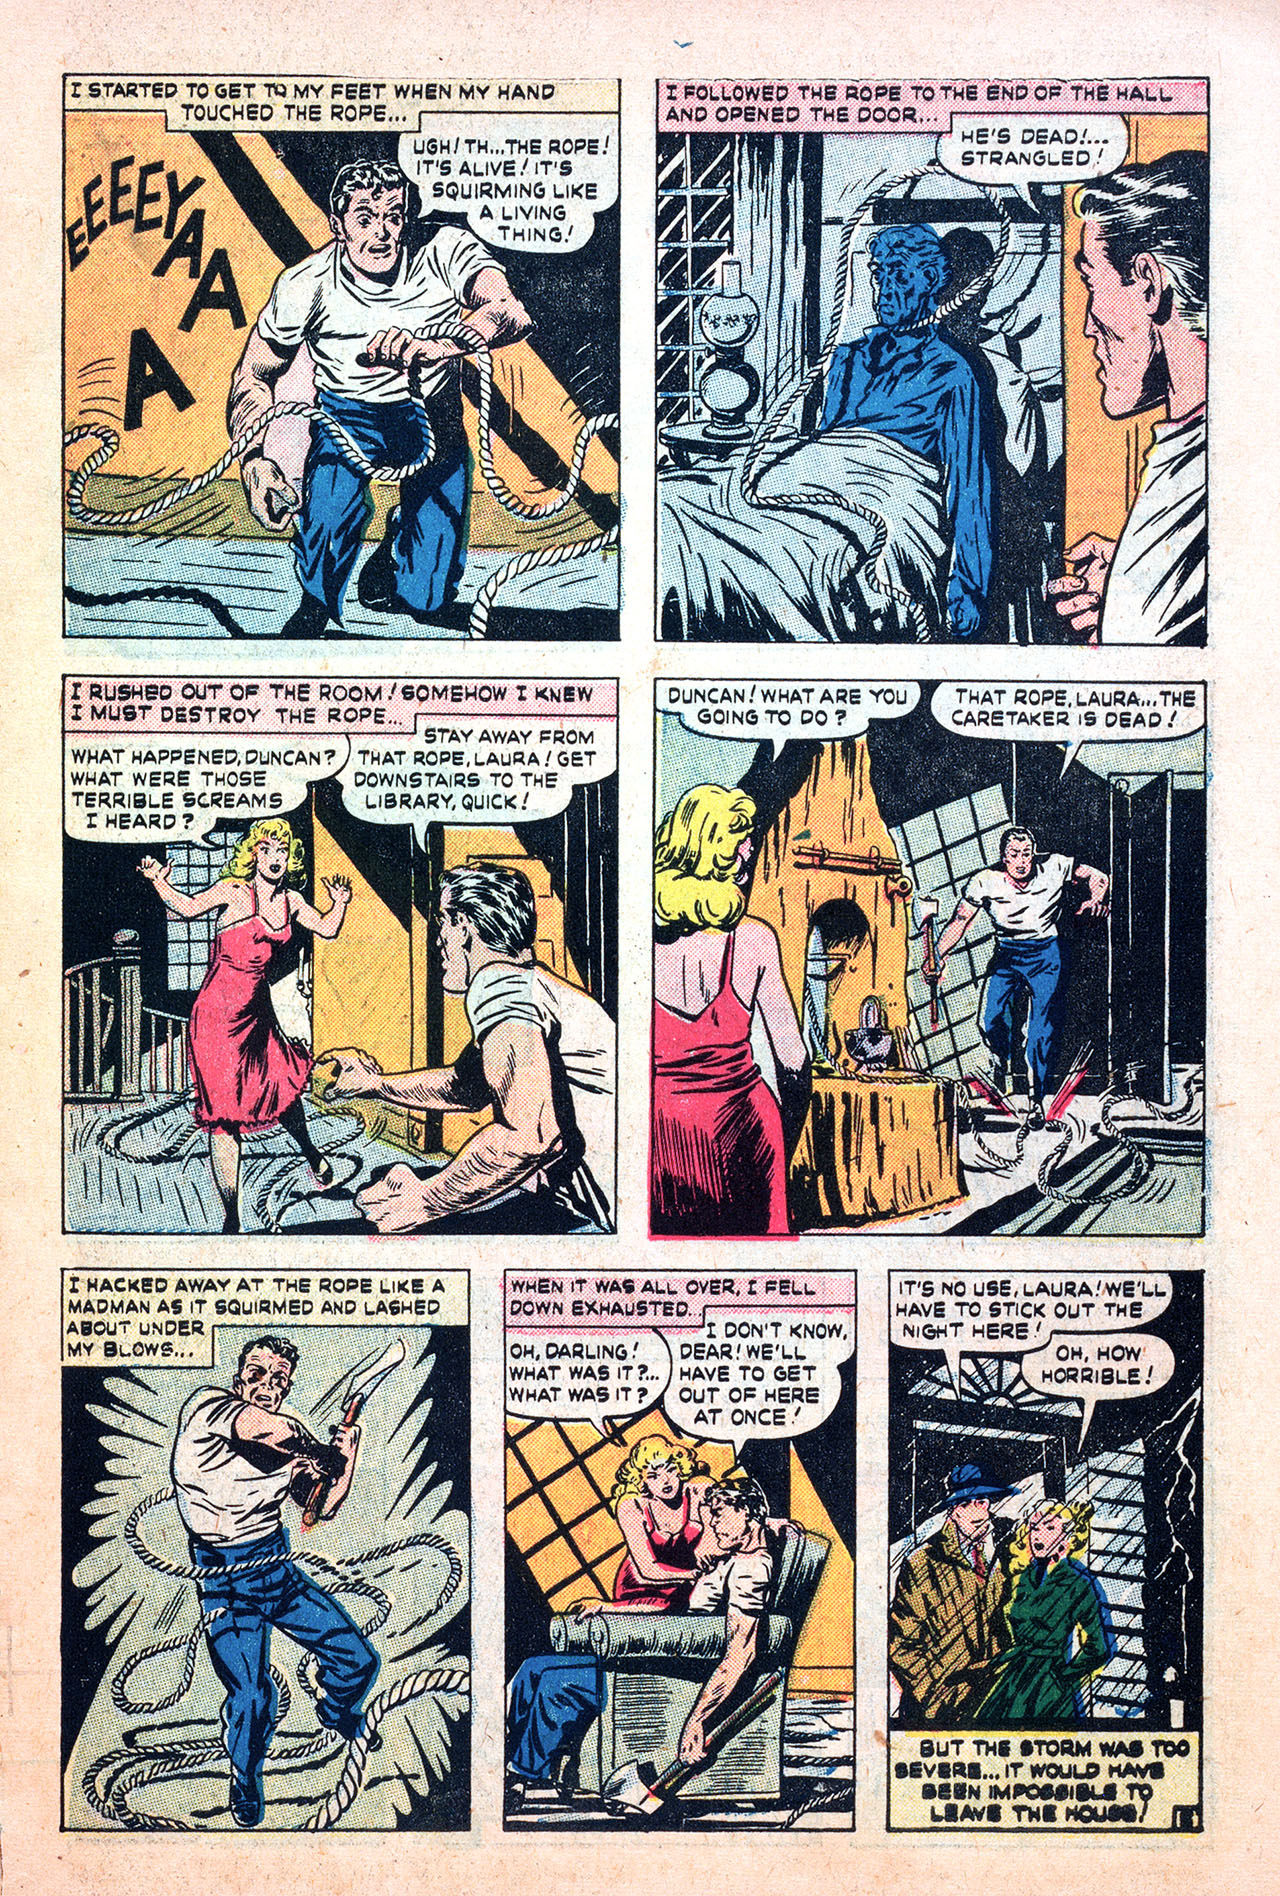 Marvel Tales (1949) 94 Page 6